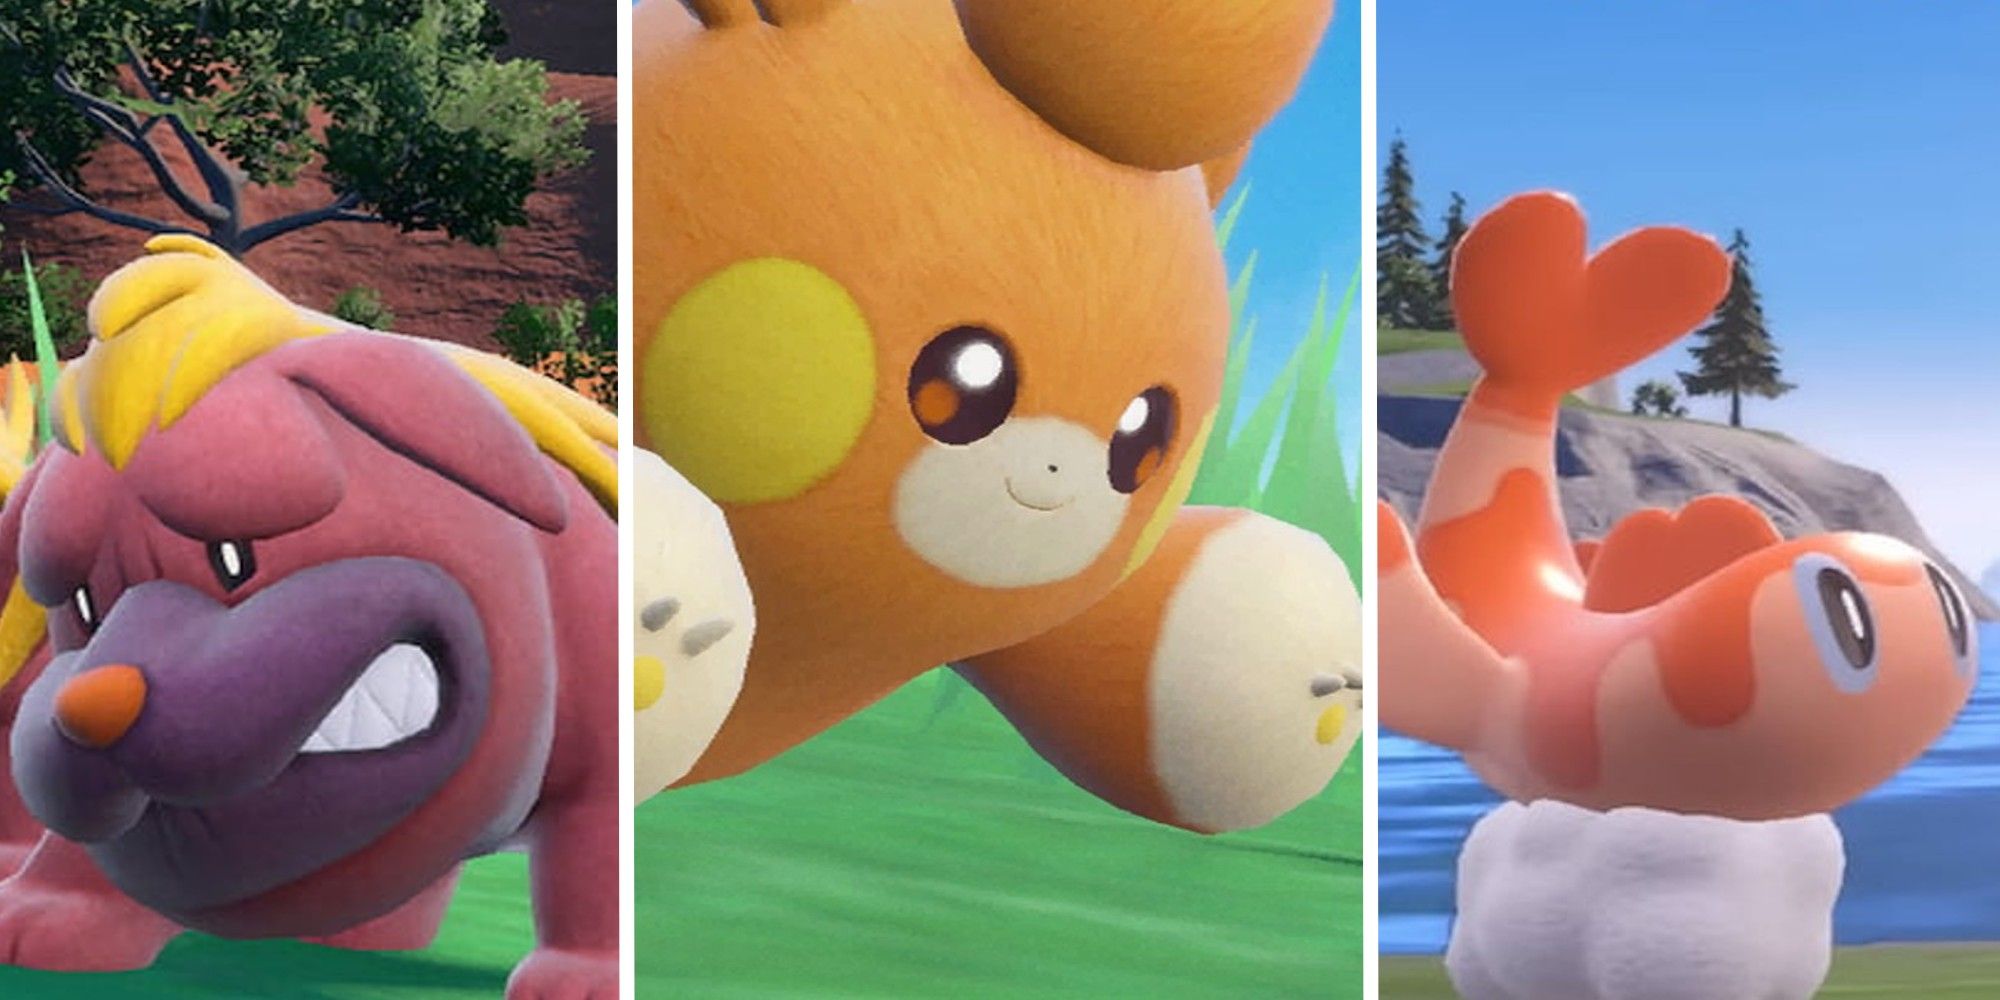 Pokemon Scarlet and Violet Cutest Dex Entries Feature Image: Maschiff, Pawmi and Tatsugiri